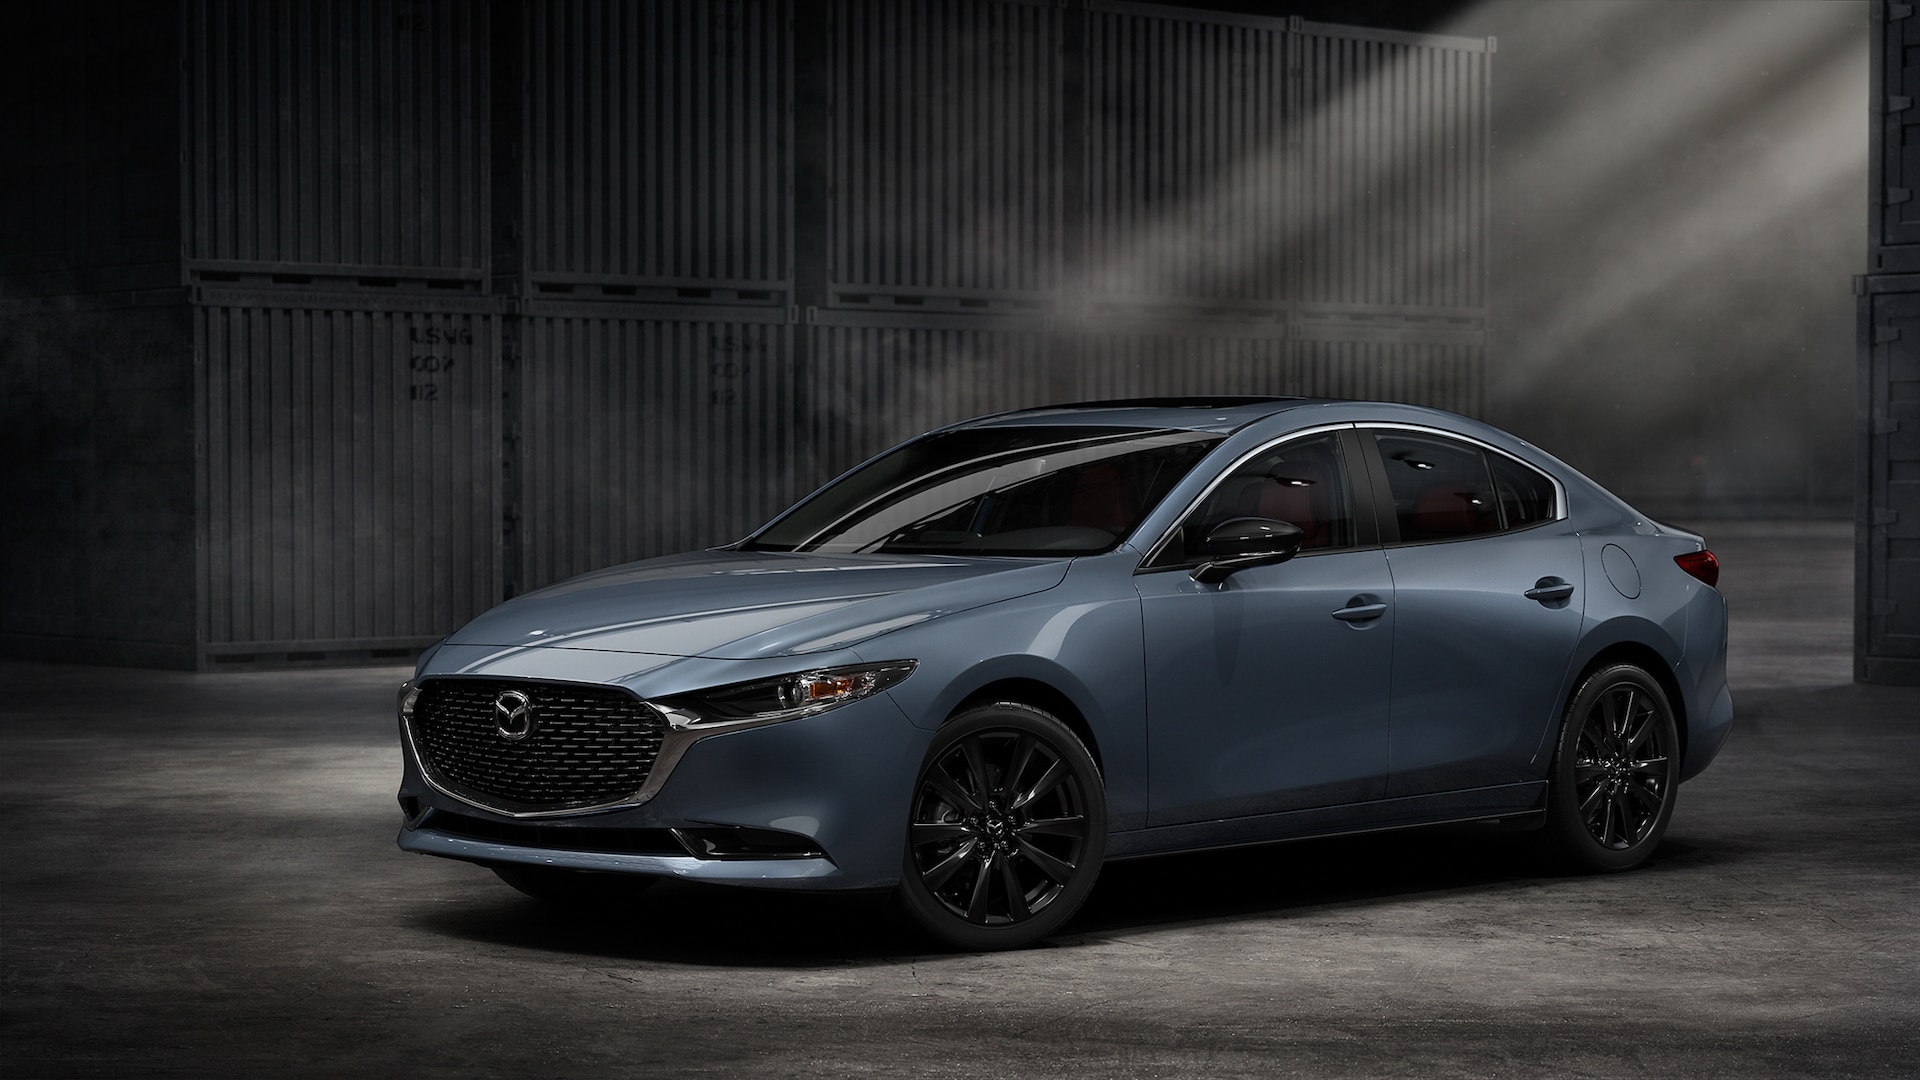 2022 Mazda 3 Price Increases Joined By New Carbon Edition, Paint Options